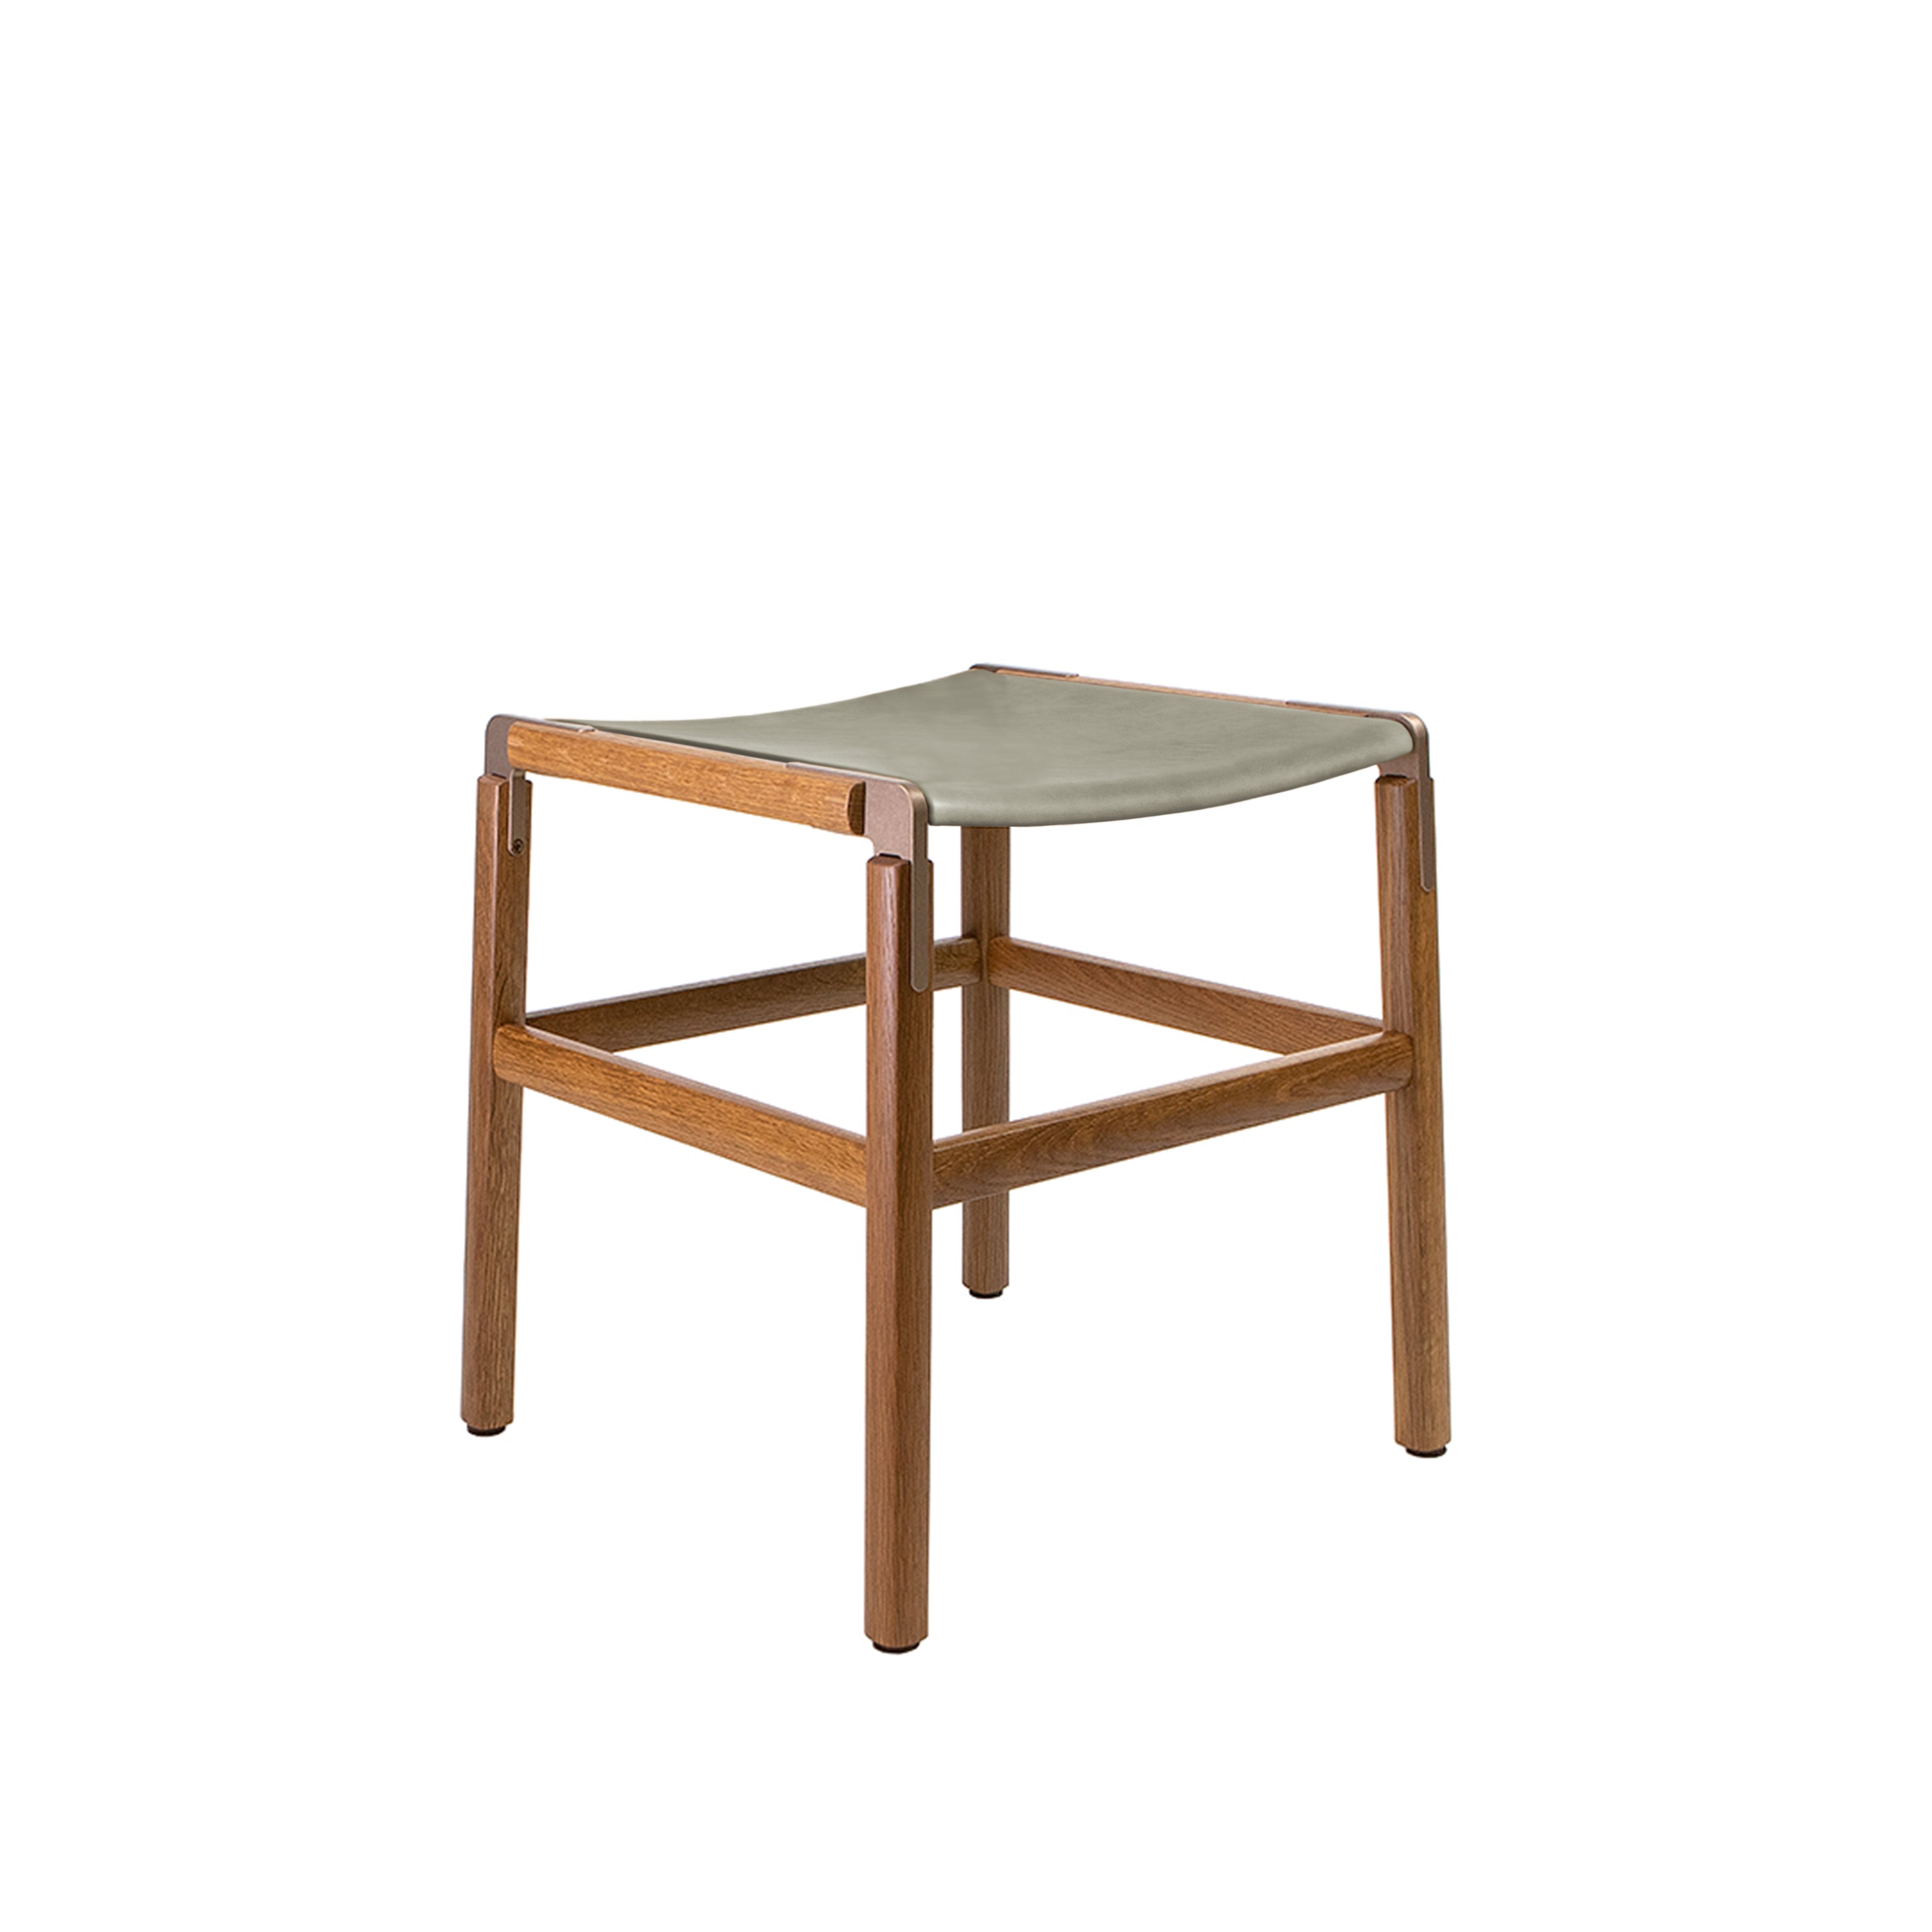 Shorty - Oxidized Oak, Copper Bronze, PVT Leather, Seat Only, Stone